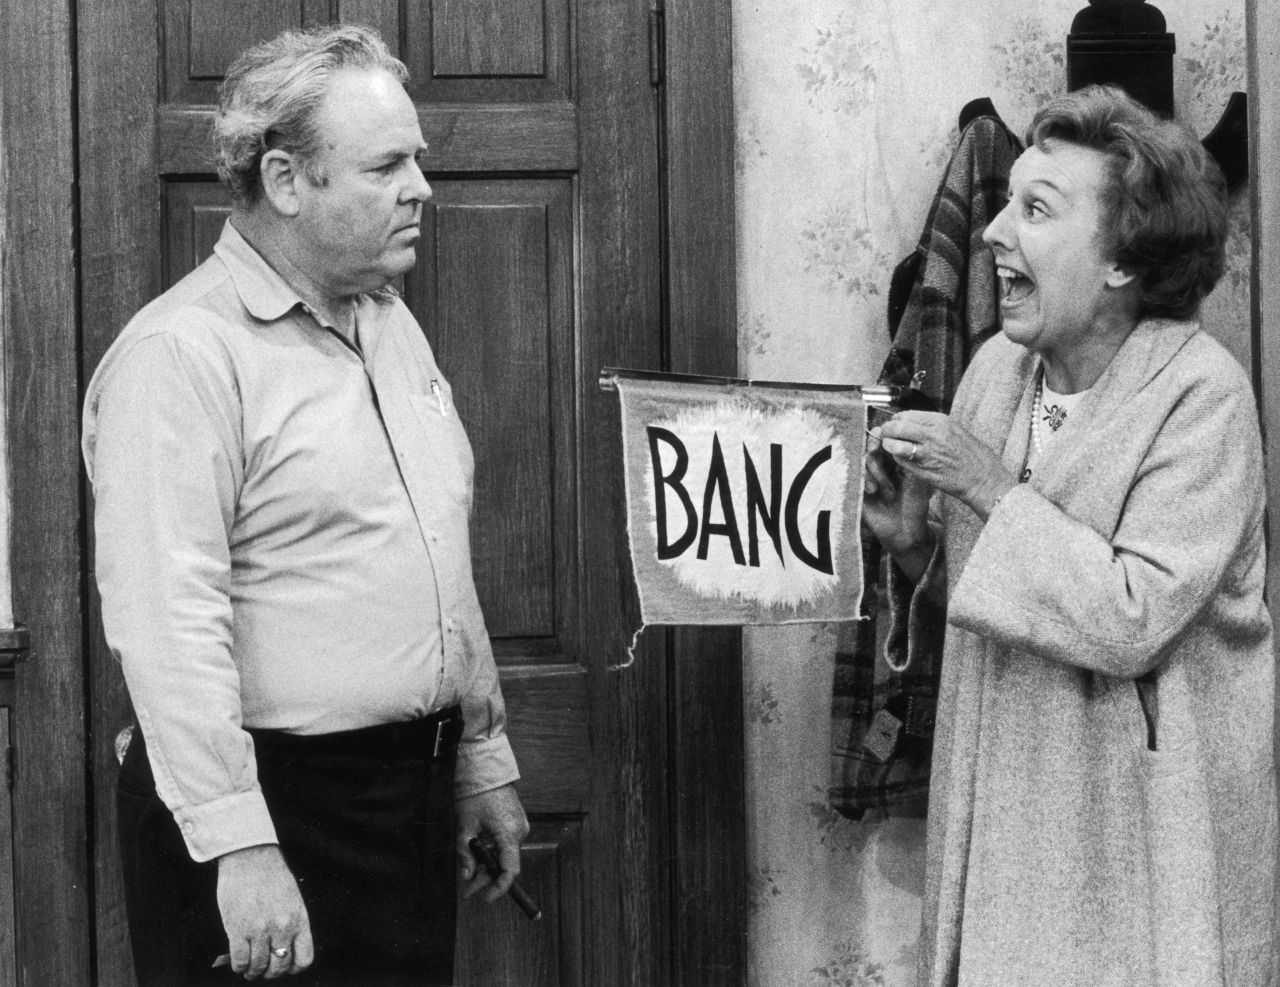 Carroll O'Connor was so good as the racist, sexist and often insensitive Archie Bunker on "All in the Family" (1971-1979) that fans sometimes forgot he was acting. Jean Stapleton as his wife, Edith, was a much more likeable character.